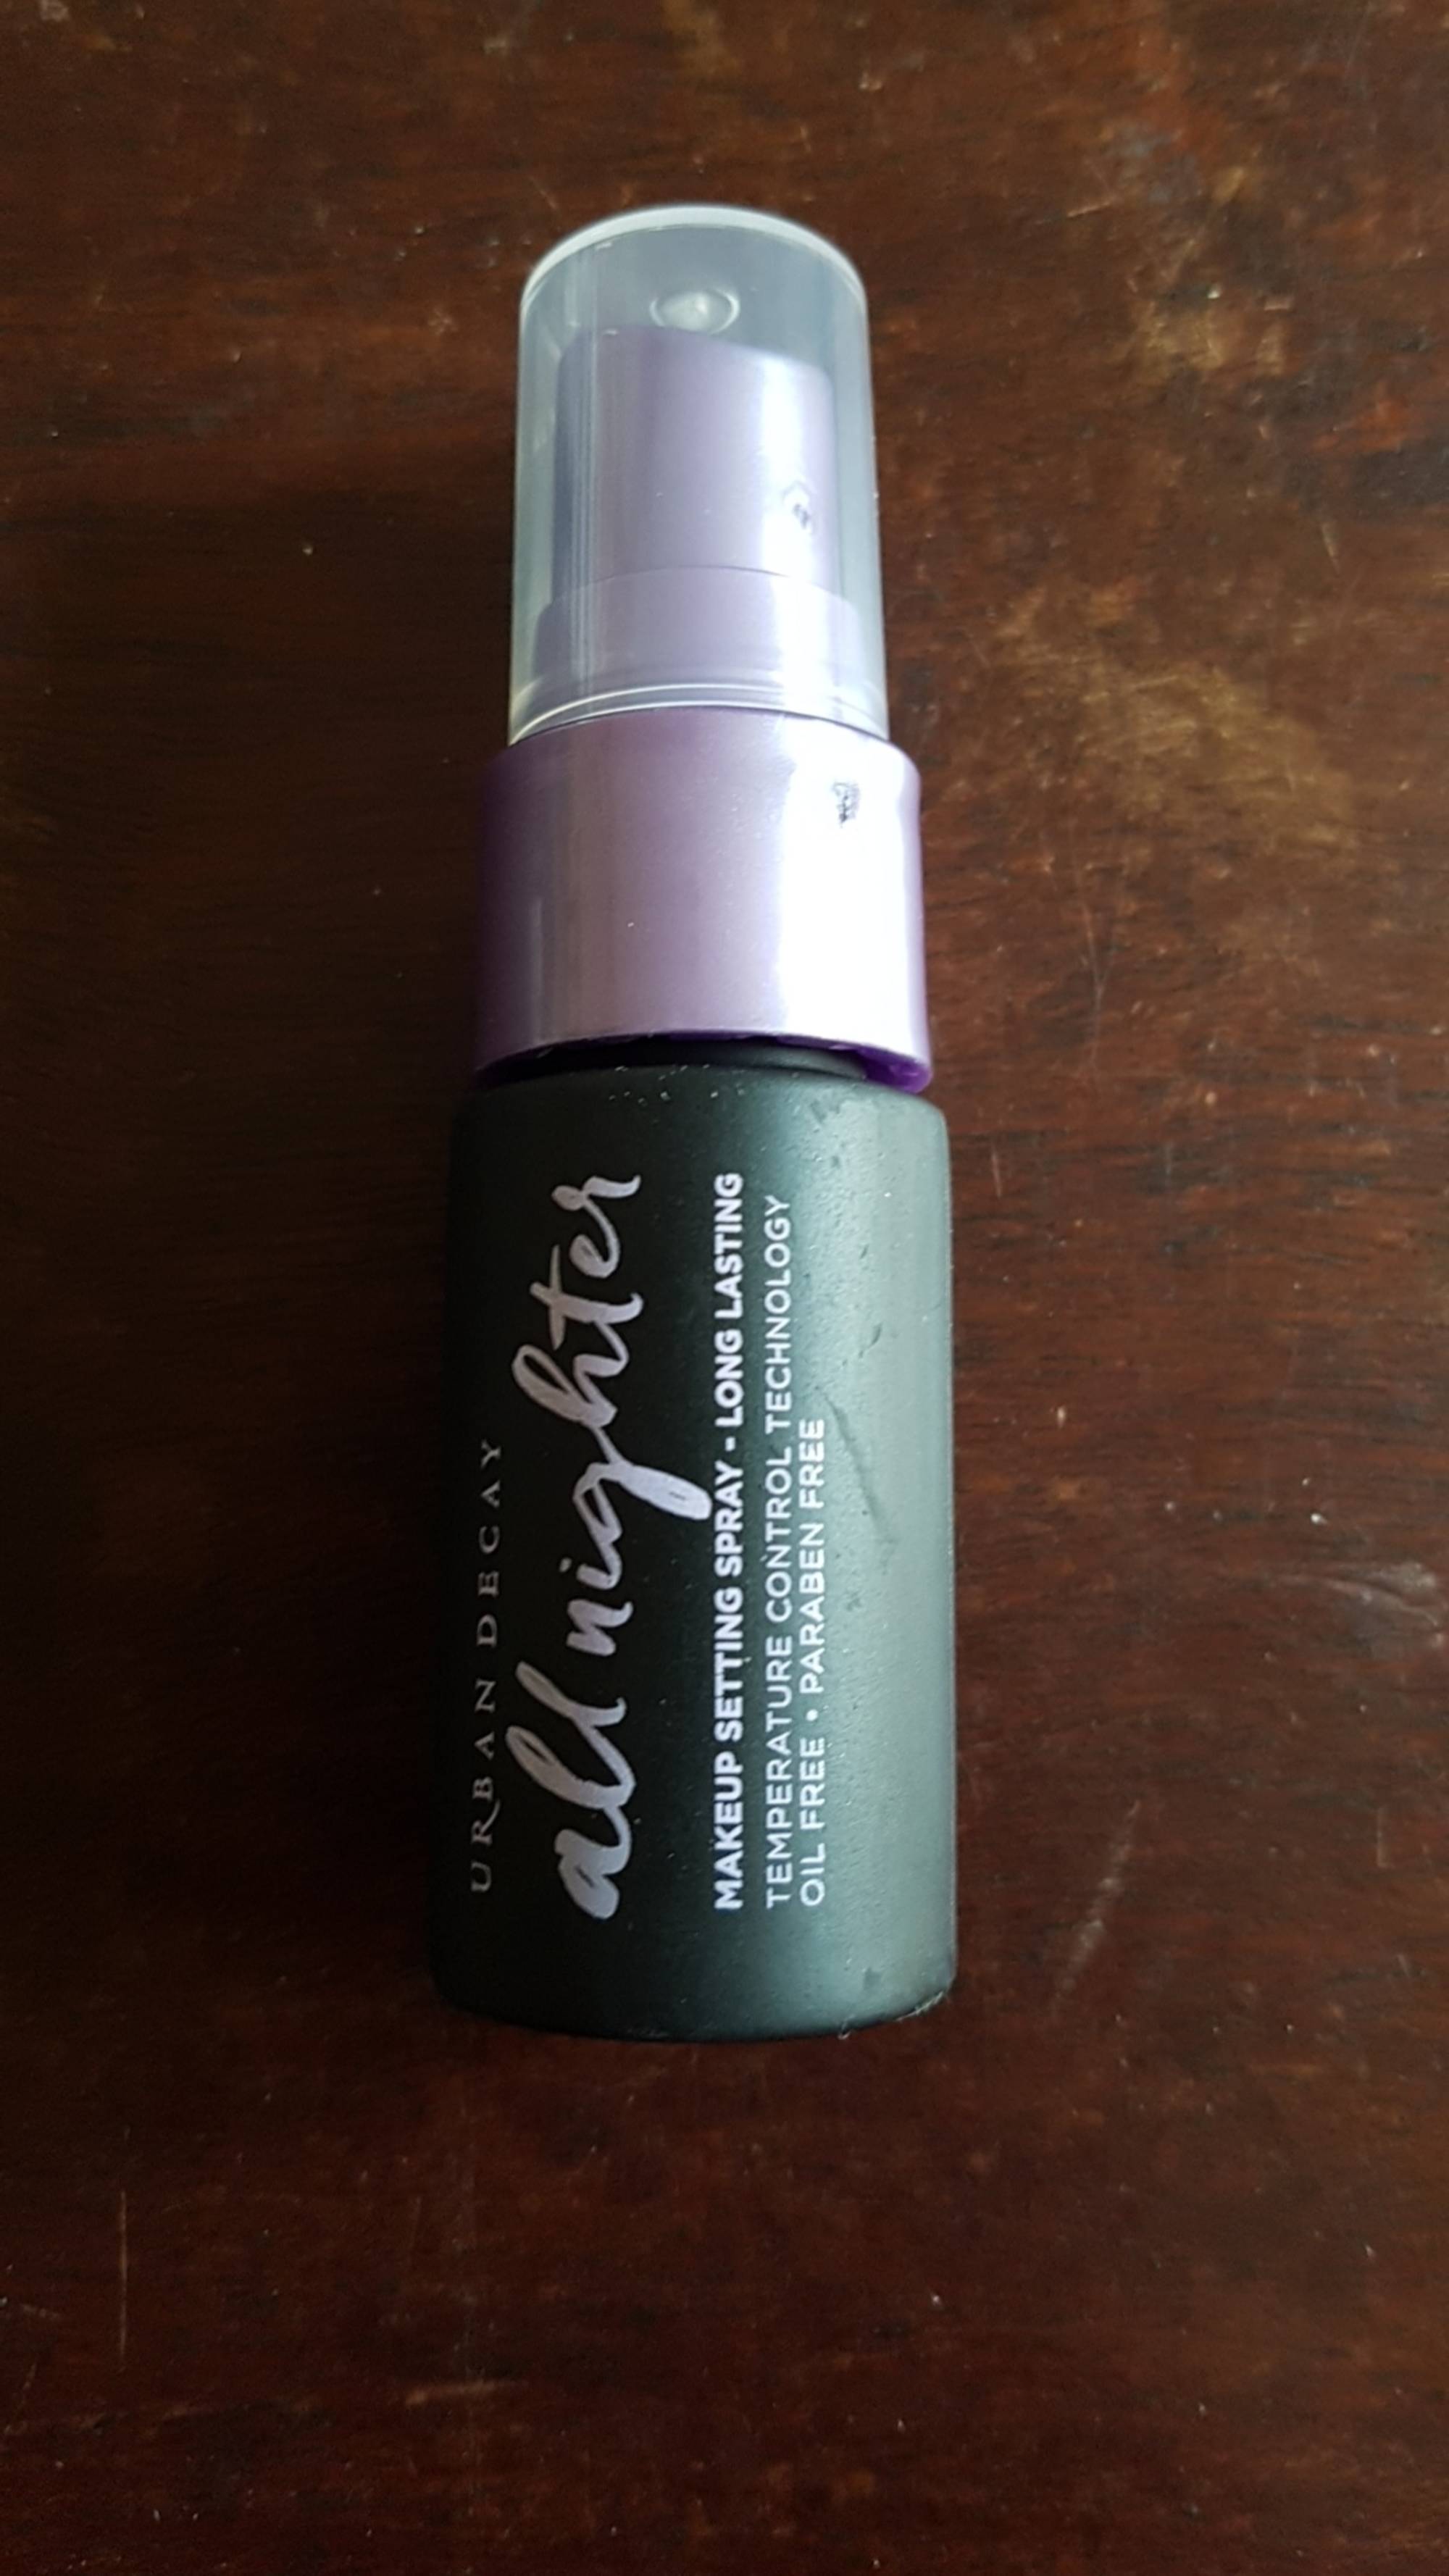 URBAN DECAY - All nighter - Makeup setting spray